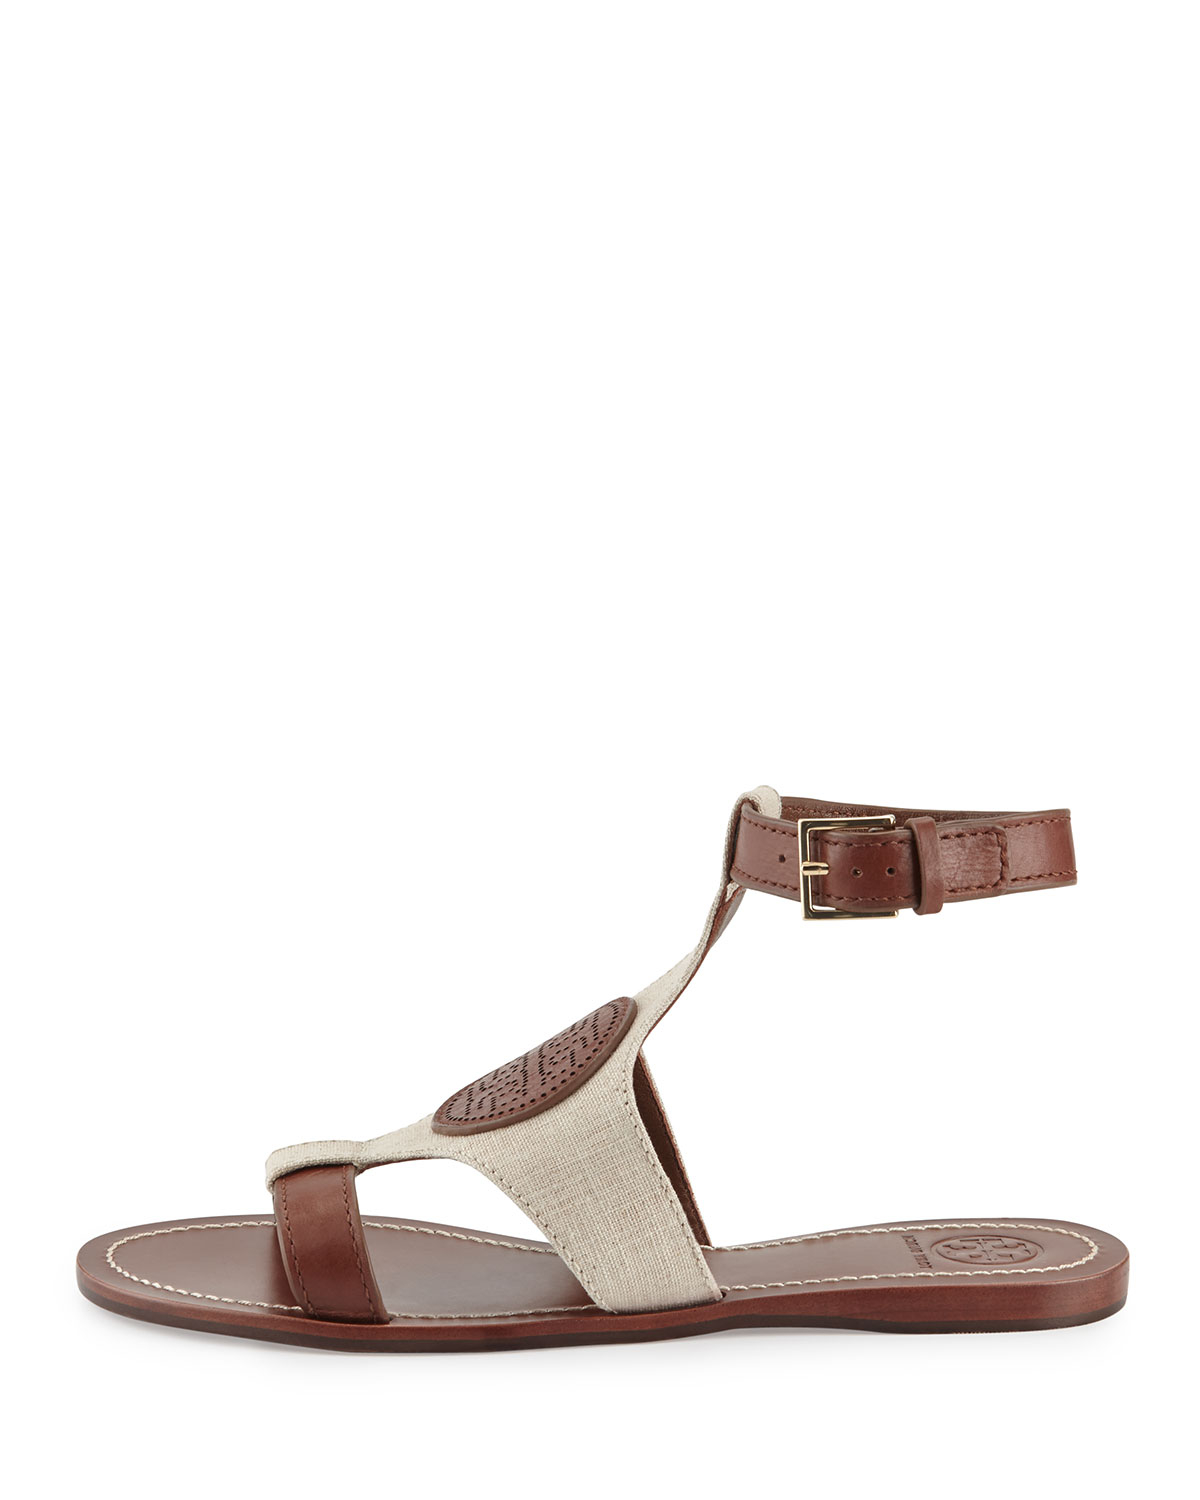 Tory burch Perforated Logo Flat Sandals in Natural | Lyst